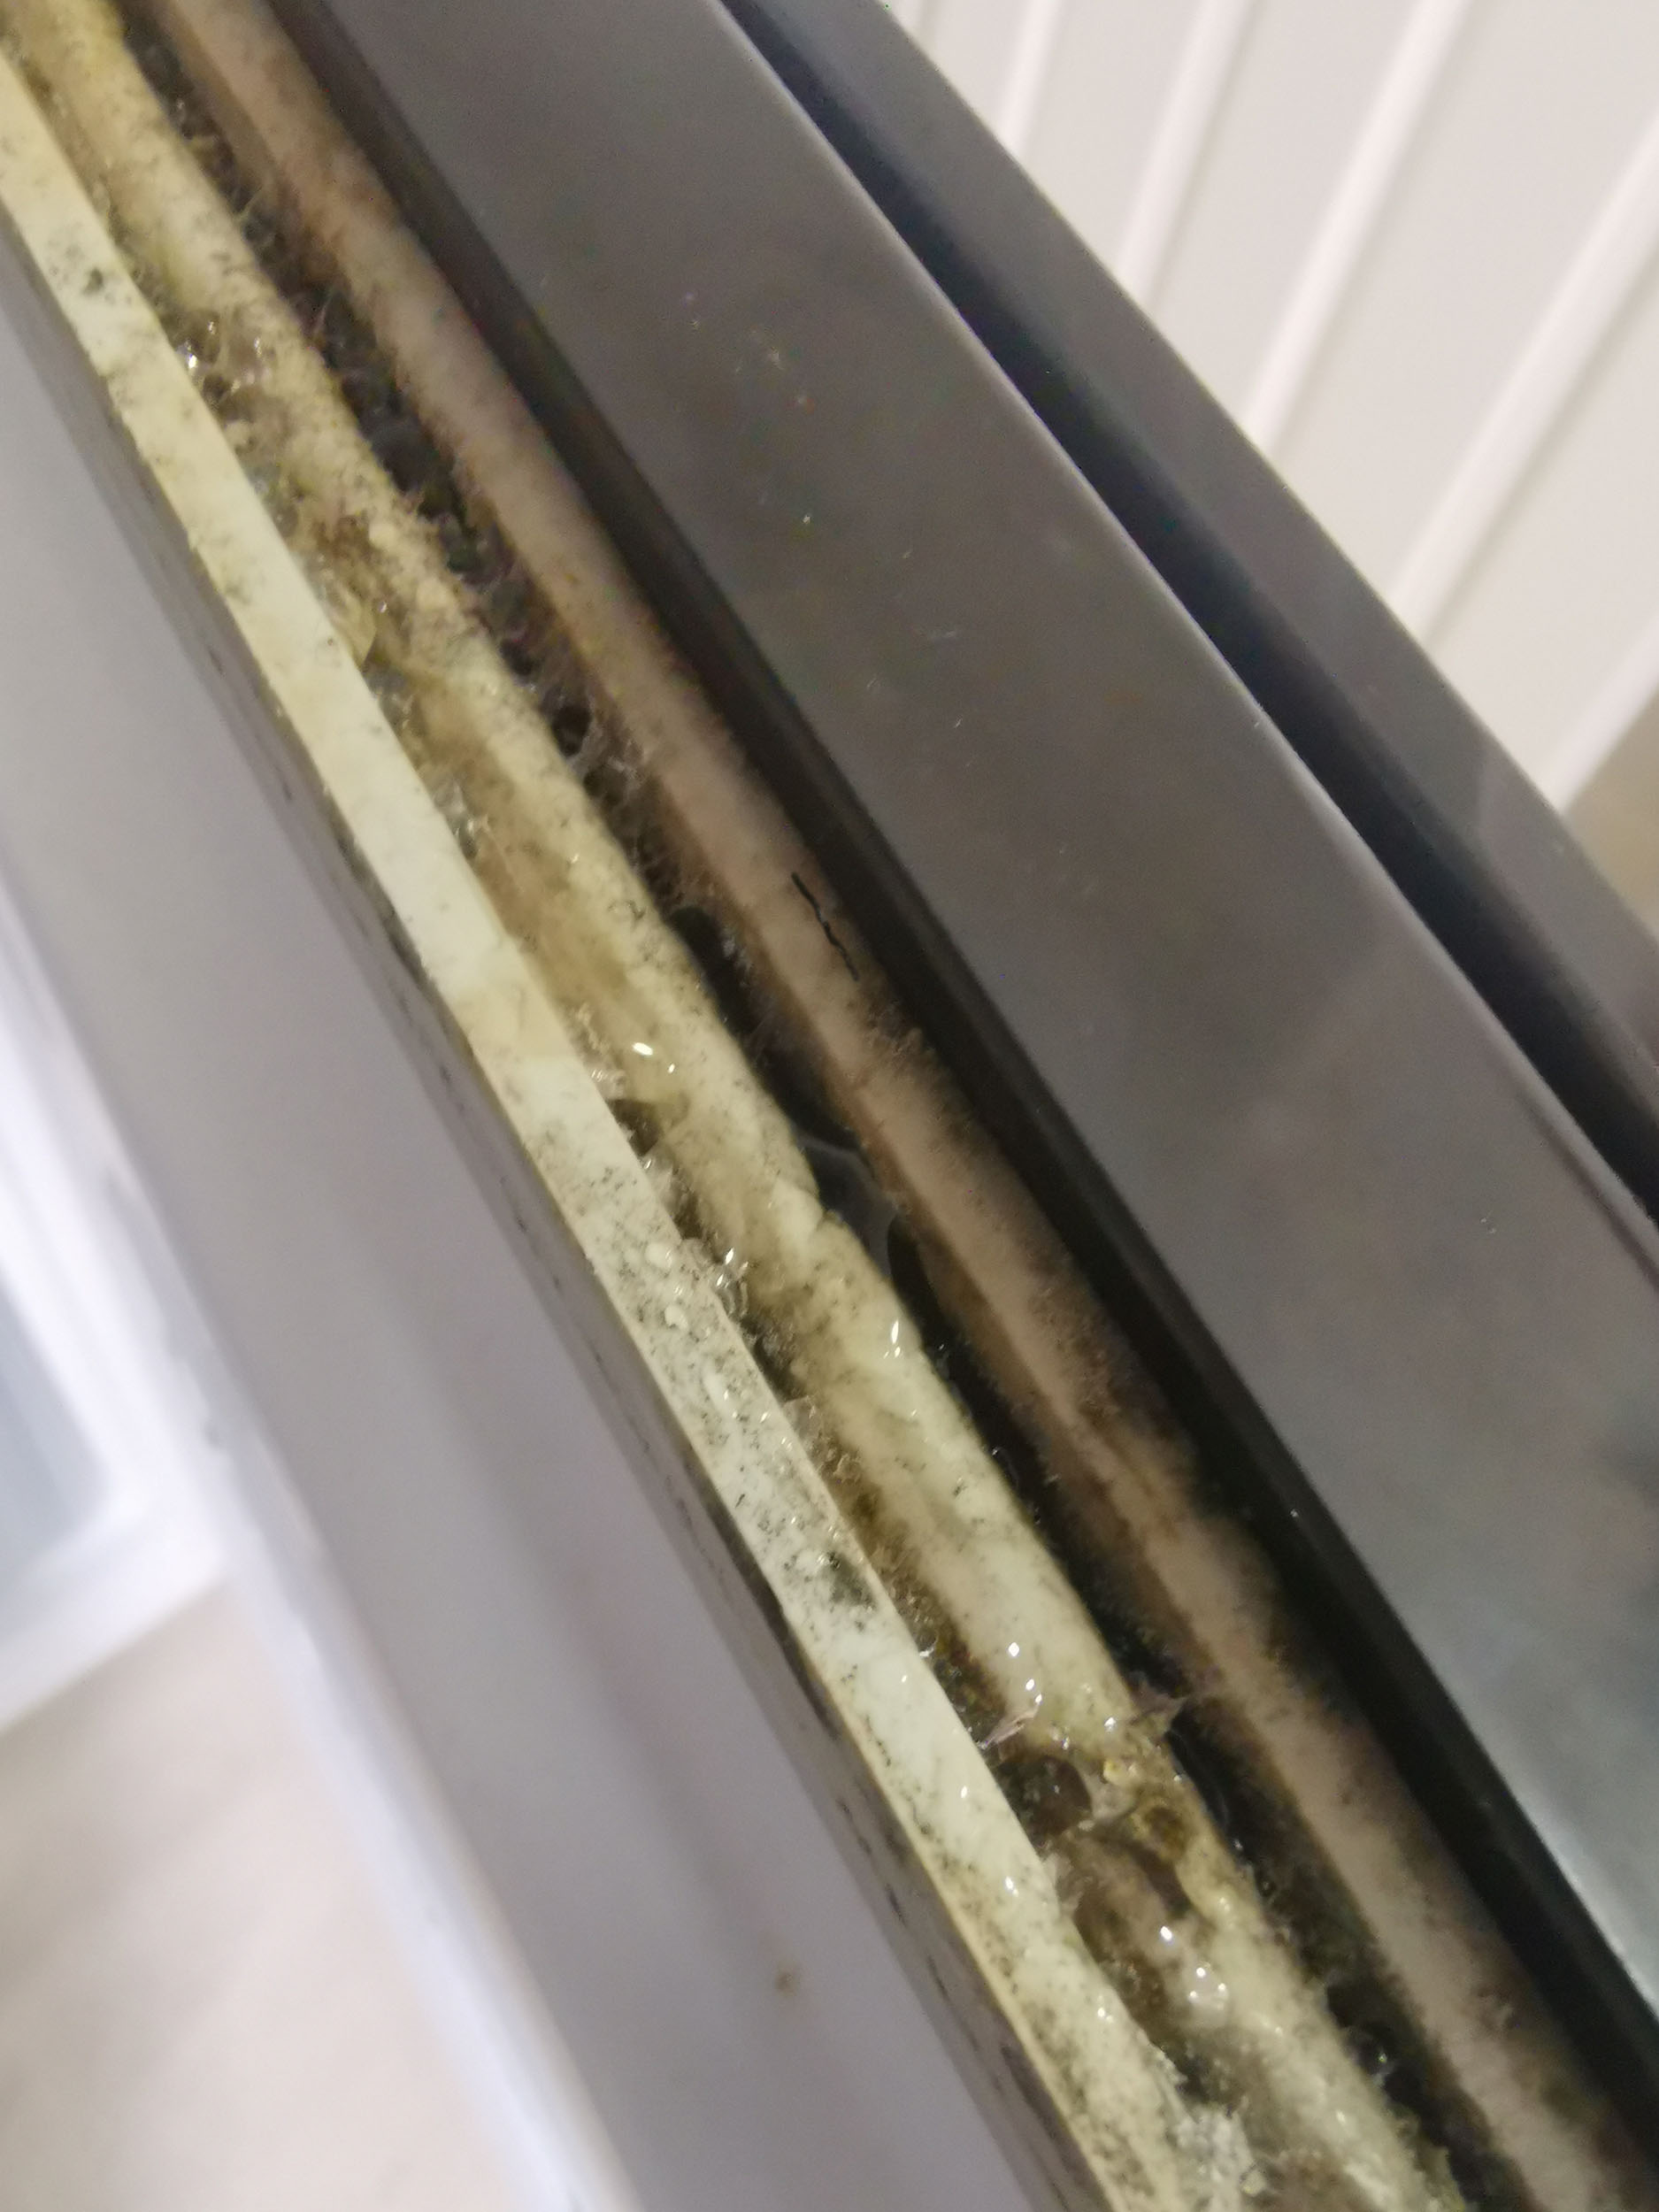 Mould-covered fridge in holiday rental - Tourism News UK